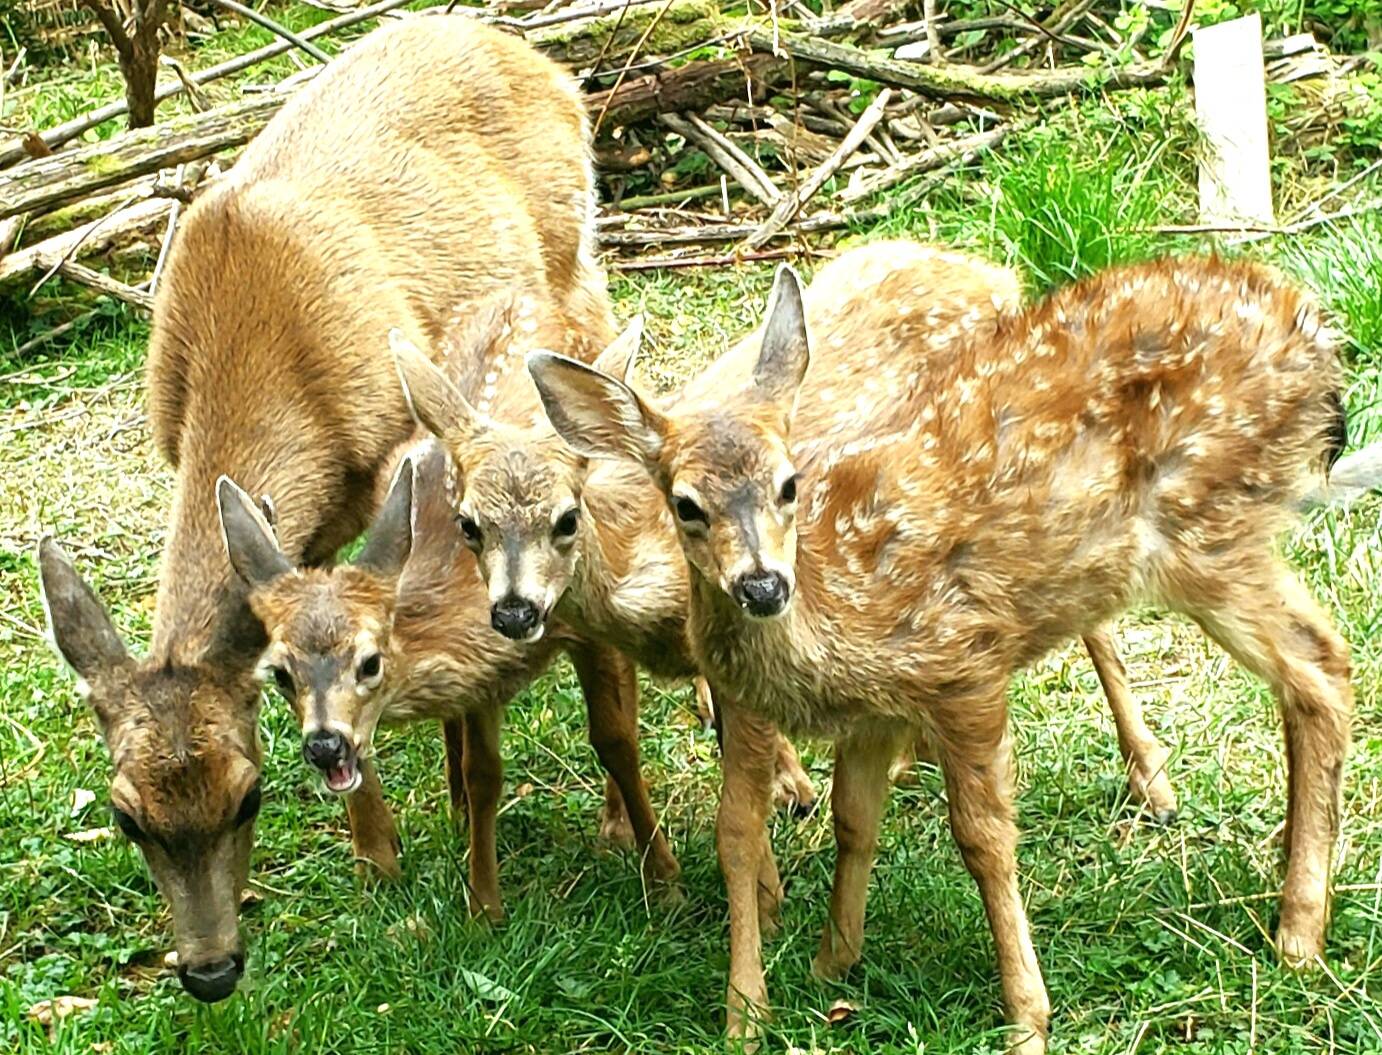 Photo provided by Diane Jhueck
Whidbey residents have been reporting a higher number of deer deaths this summer than usual to the state Department of Fish and Wildlife. A biologist for the department said there could be many possible causes of death, including a virus.